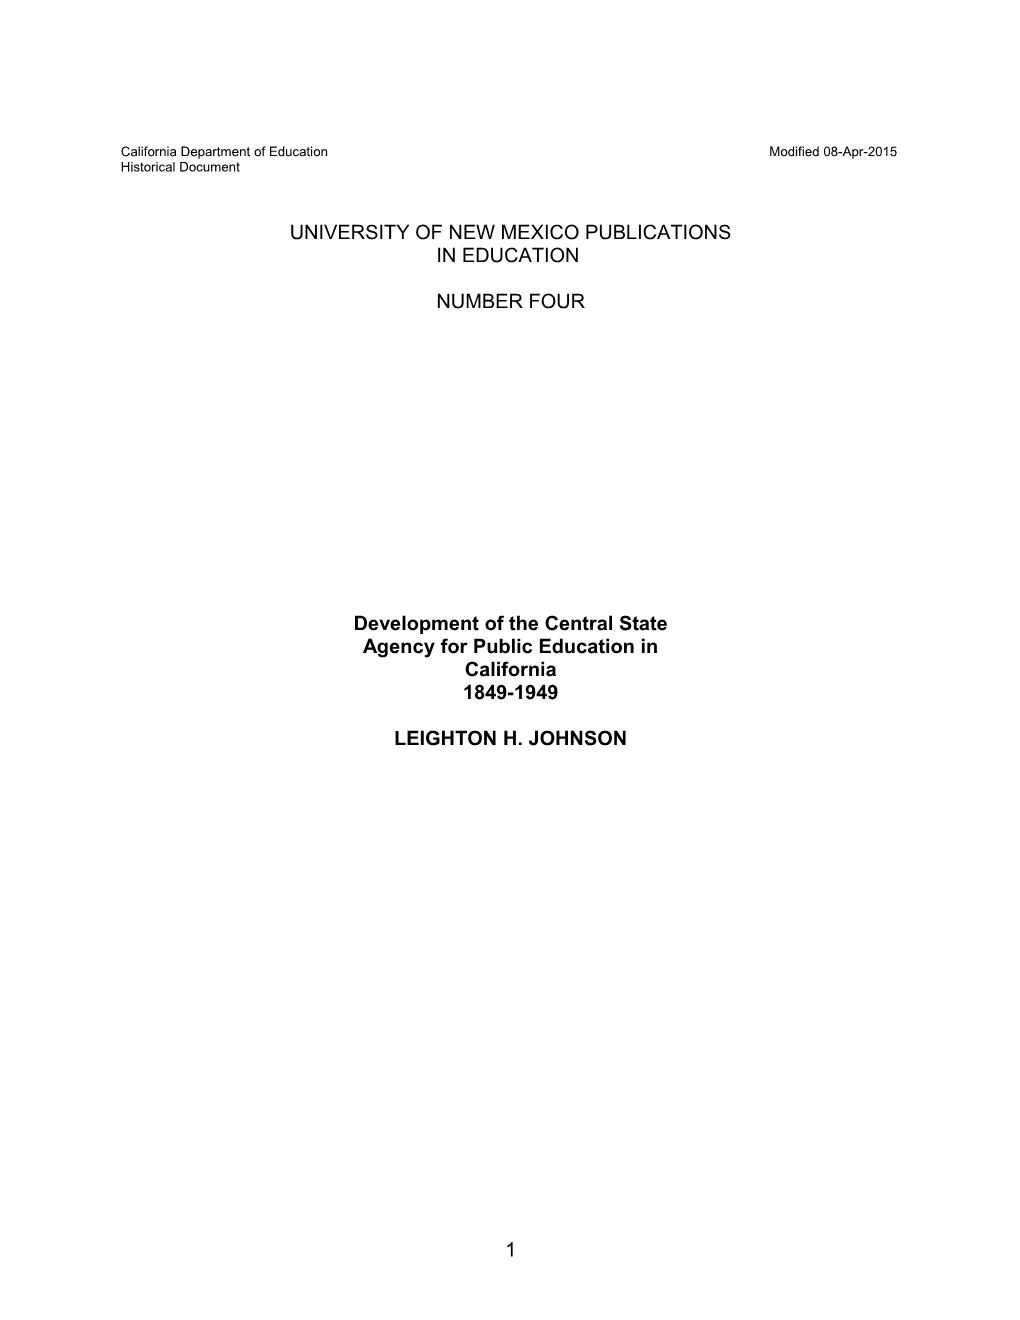 Development of Central State - Historical Documents (CA Dept of Education)